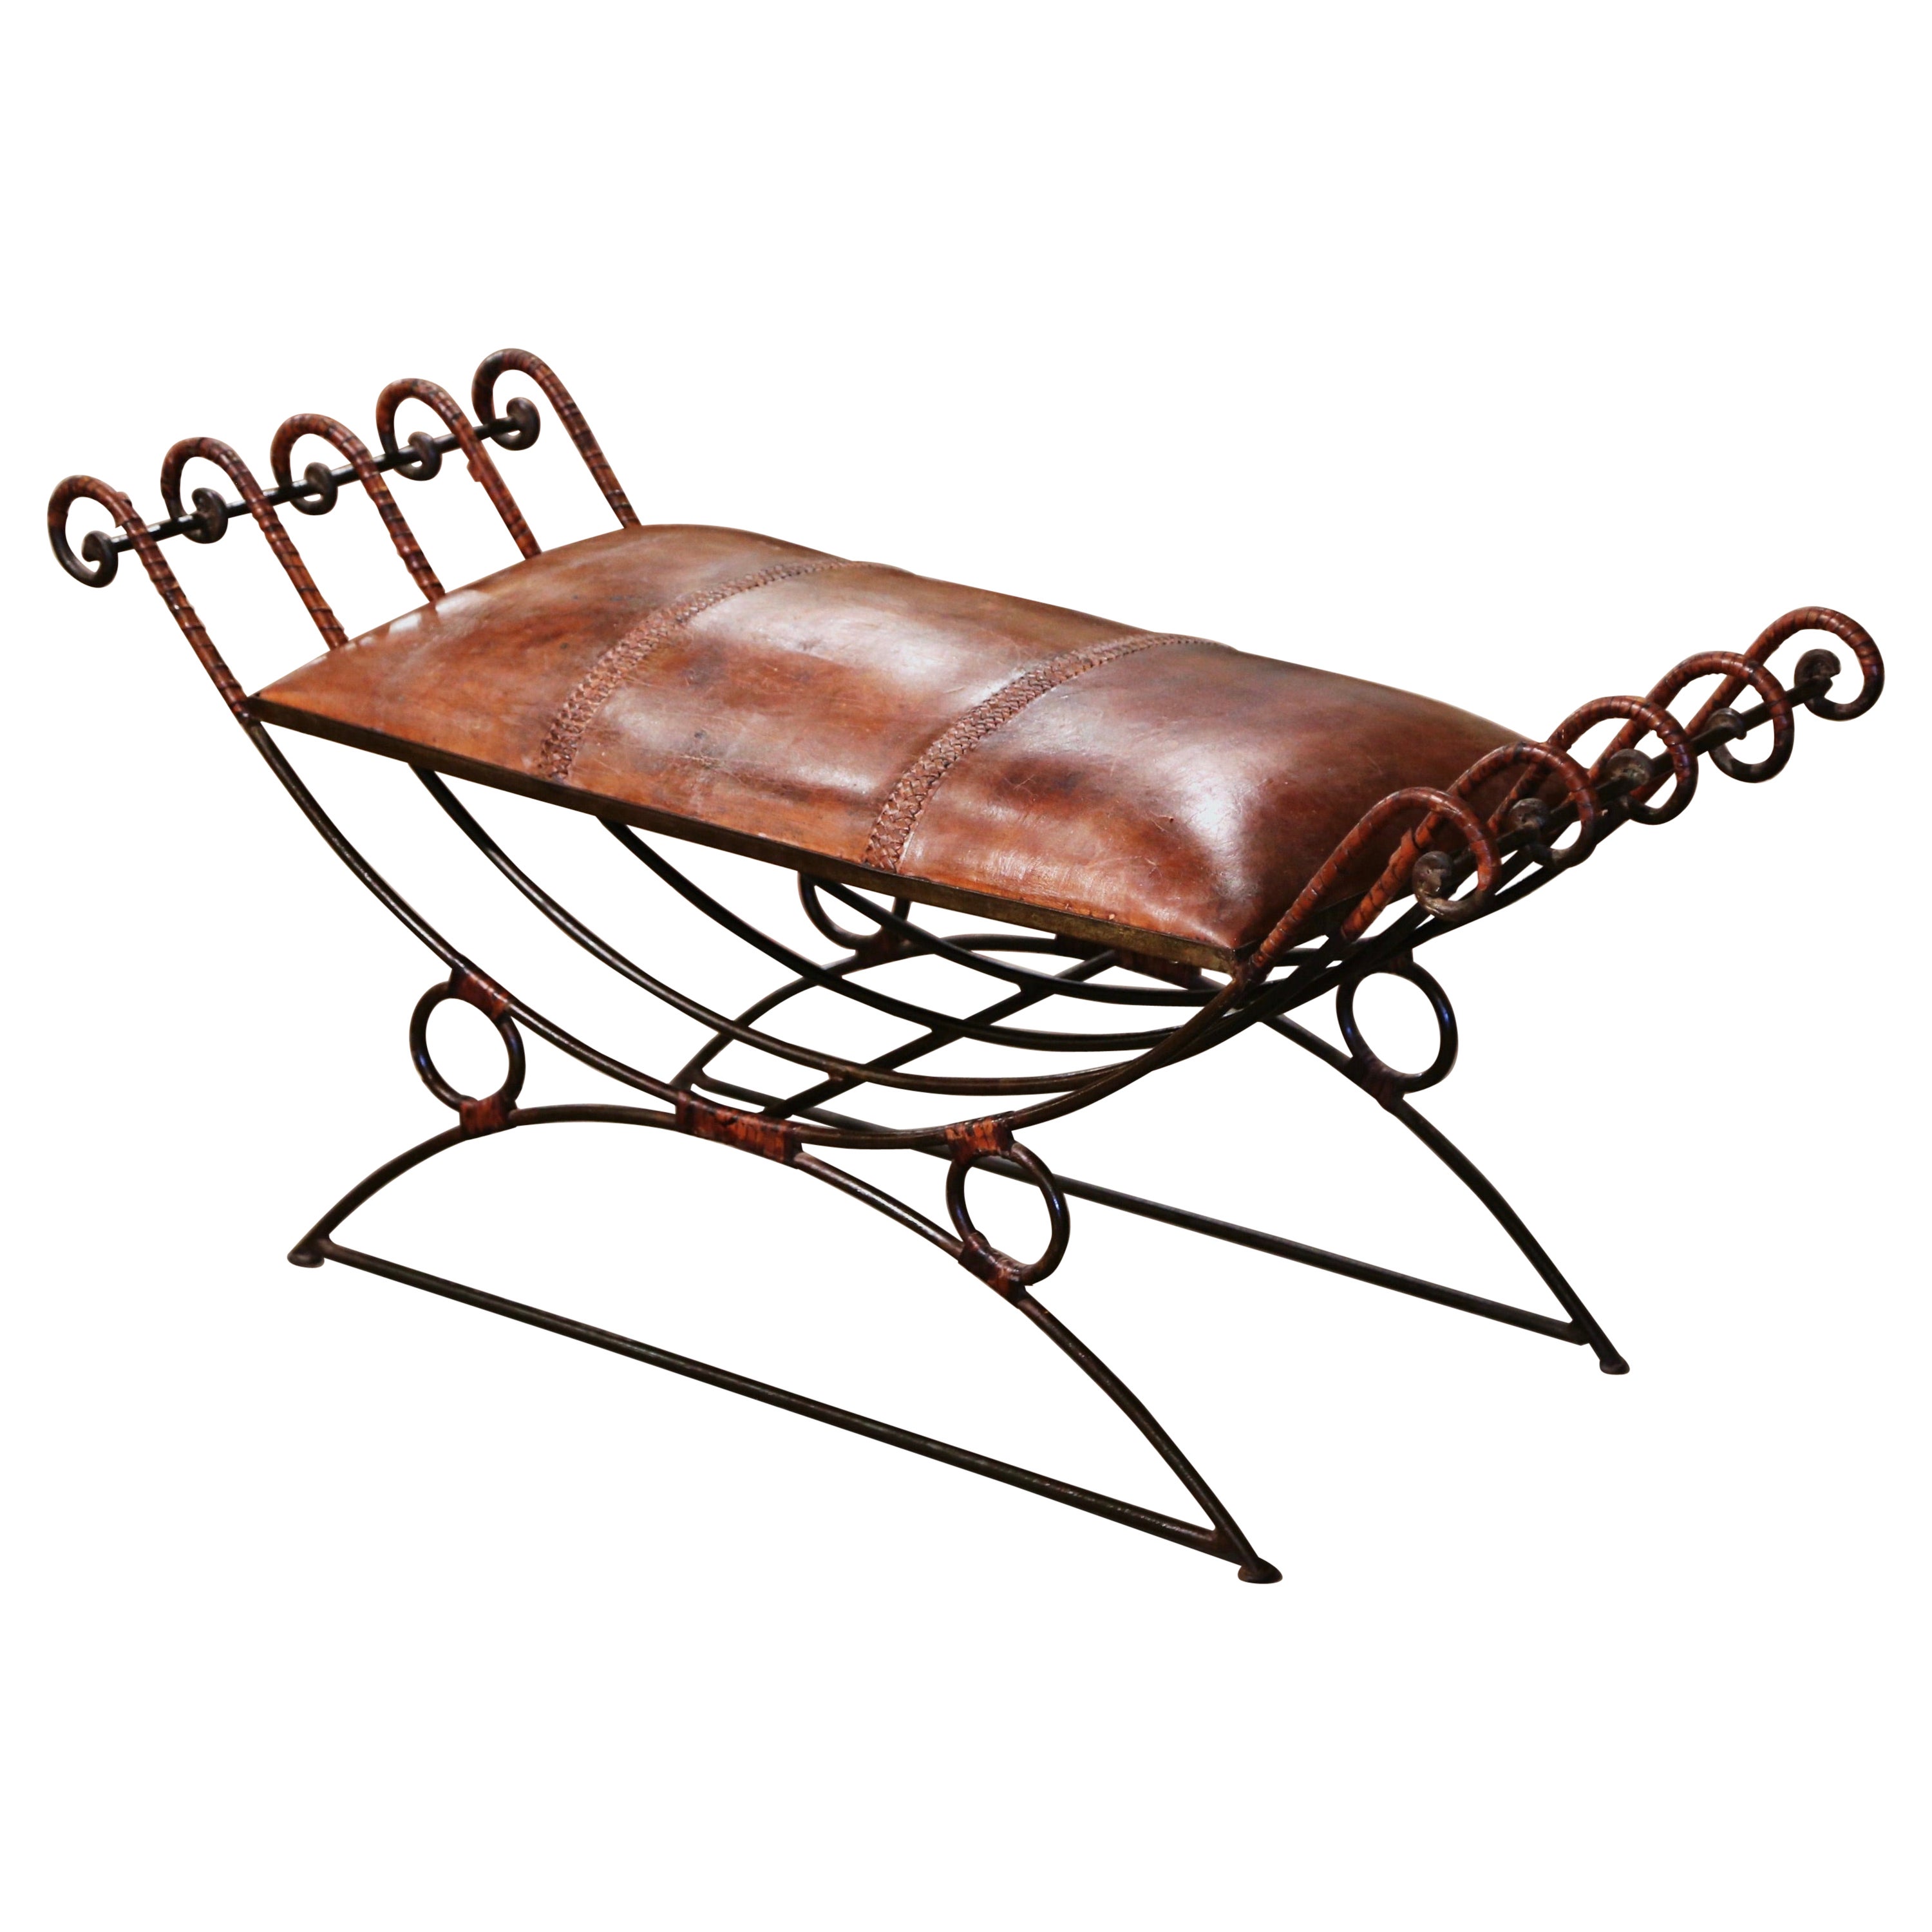 19th Century Spanish Leather and Wrought Iron "Dagobert" Curule Bench